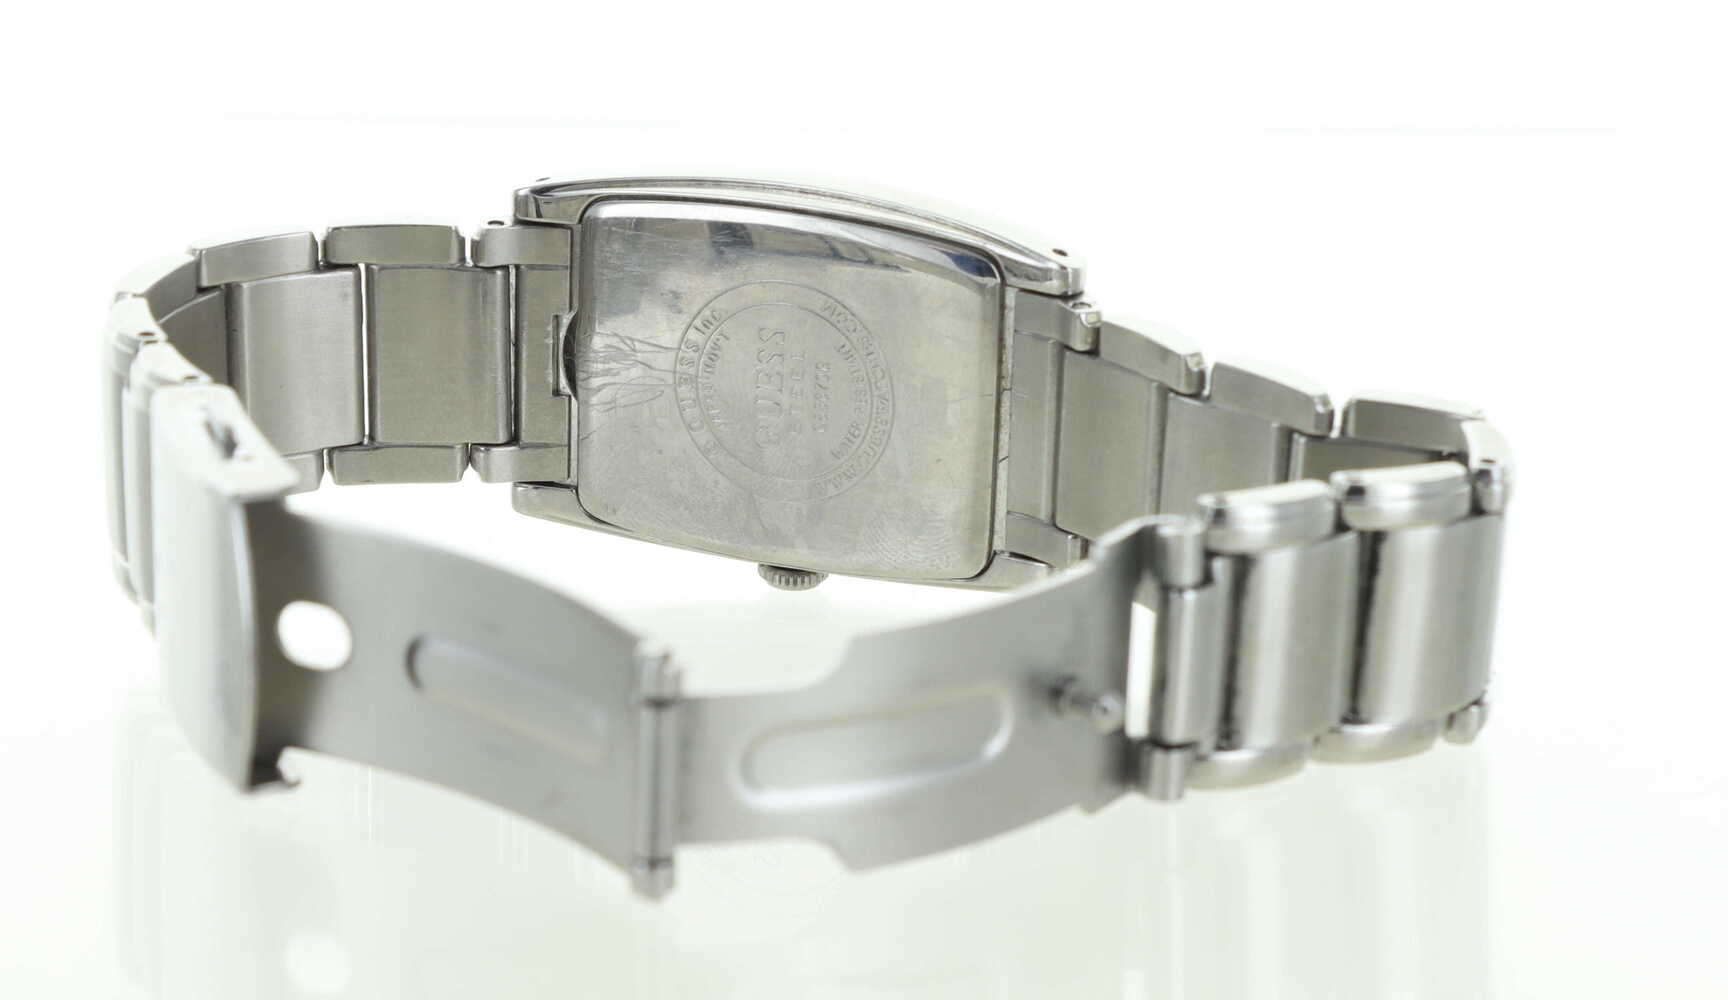 guess square face stainless steel water resistant watch g85670g